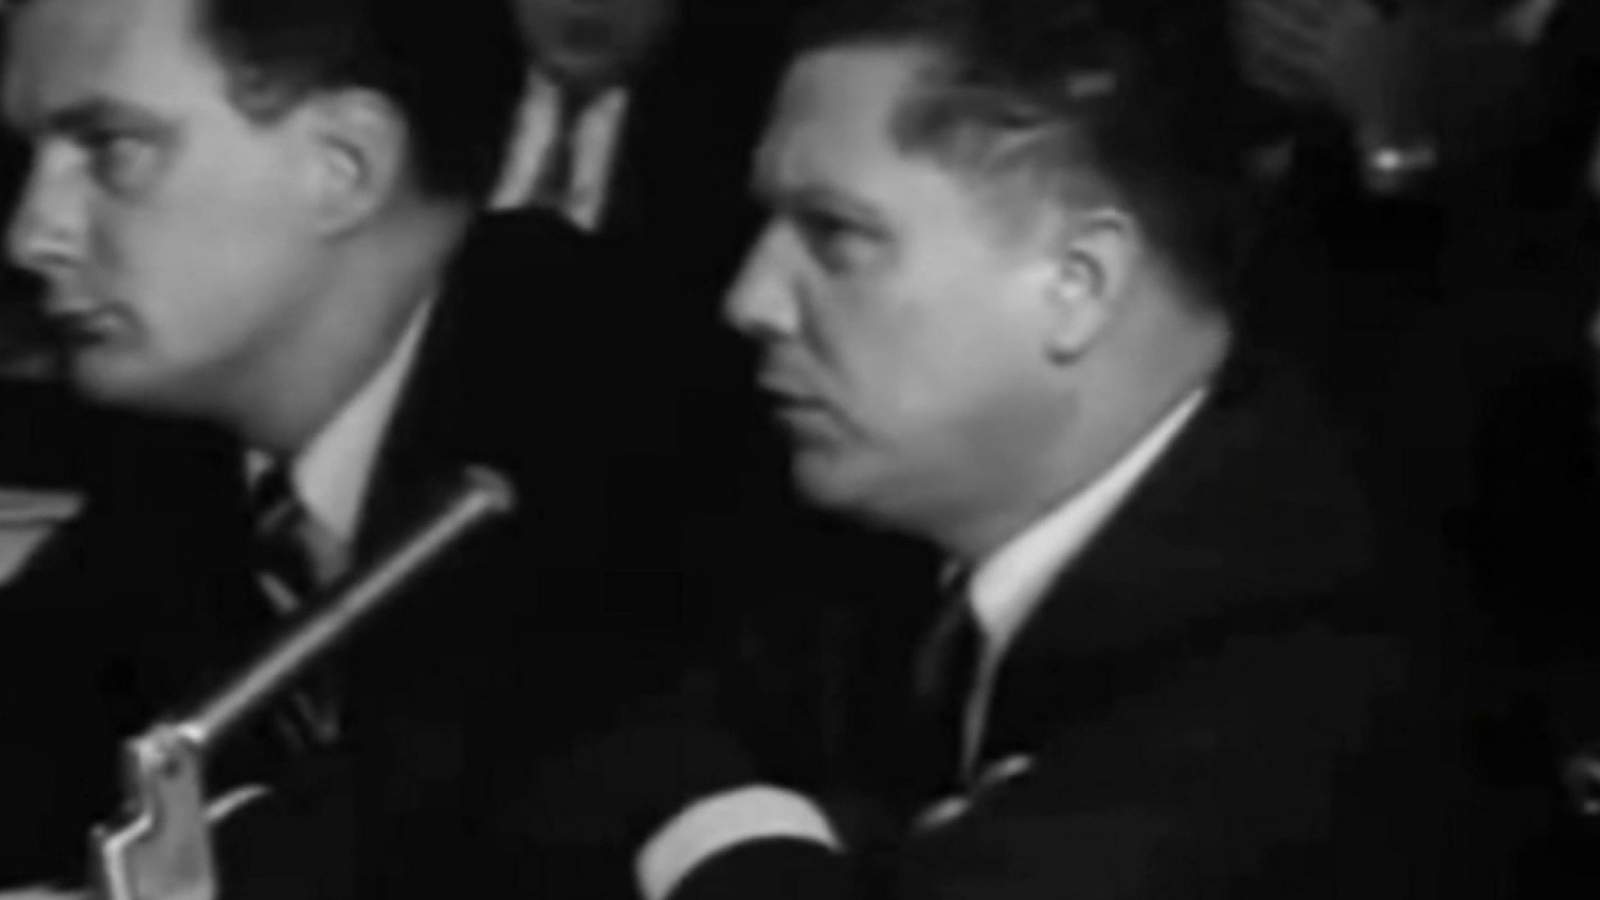 A look at Jimmy Hoffa’s relationship with Bobby Kennedy